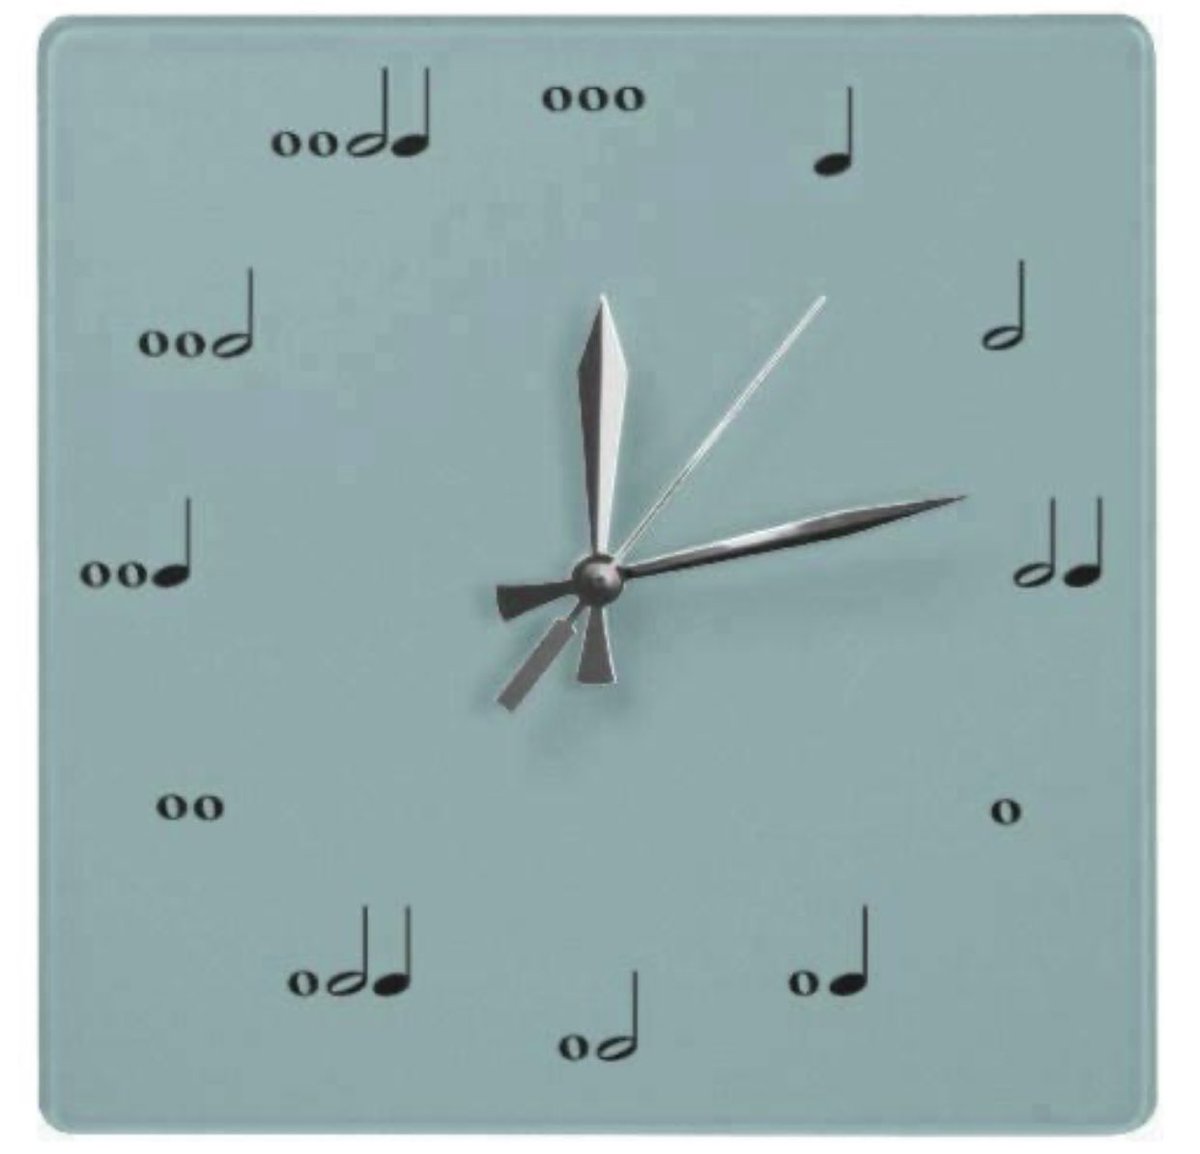 #jokeoftheday Definitely for music nerds! If you studied music you can tell time by this clock ( but the positions of the arms will help you learn them!) #musicNerds #music